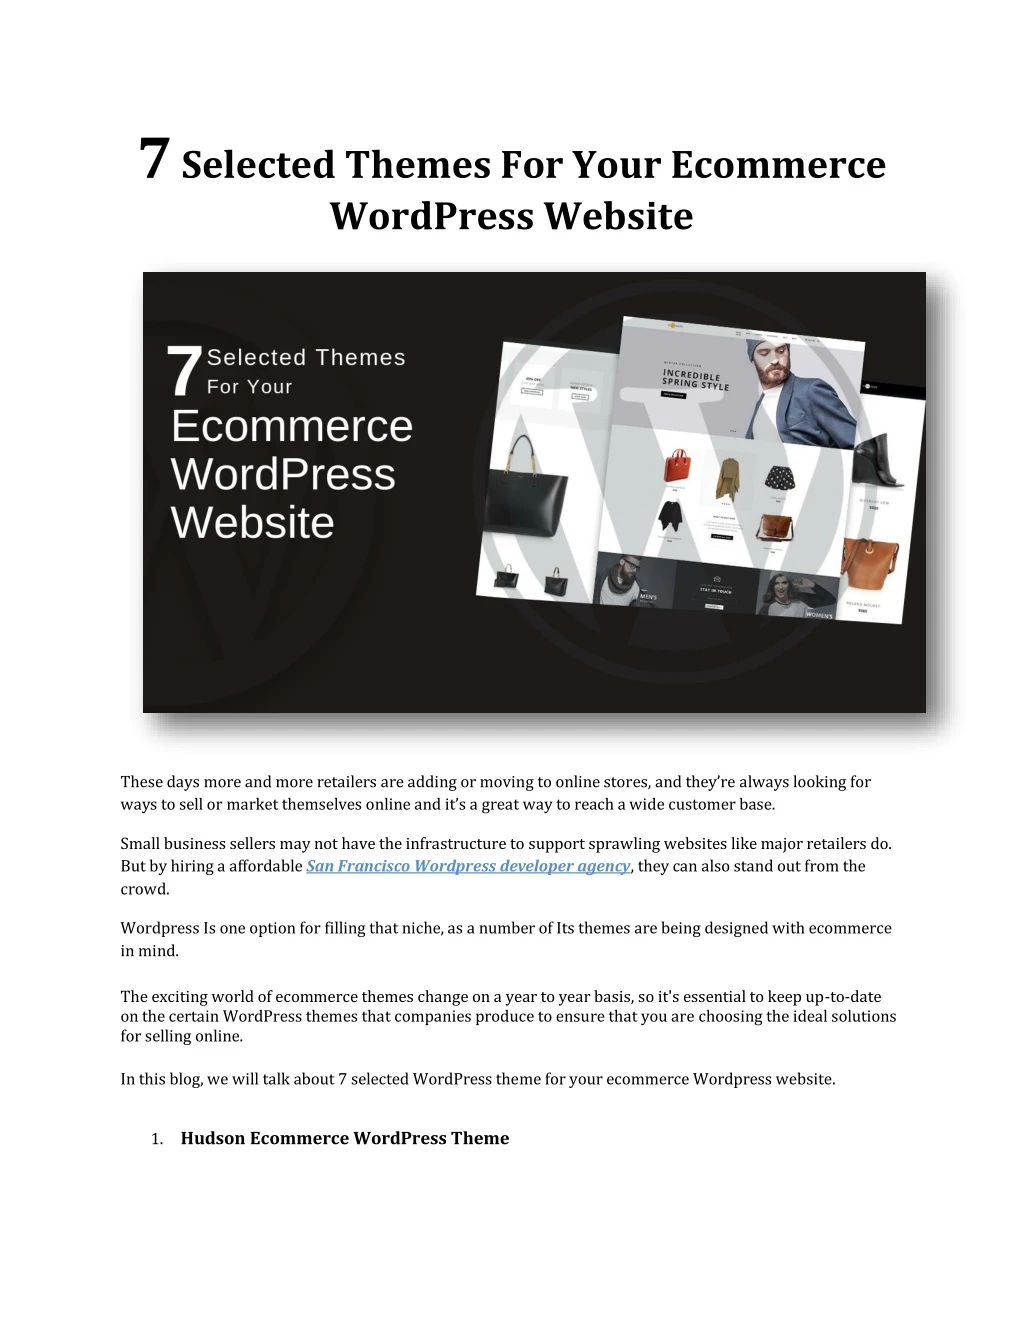 7 selected themes for your ecommerce wordpress